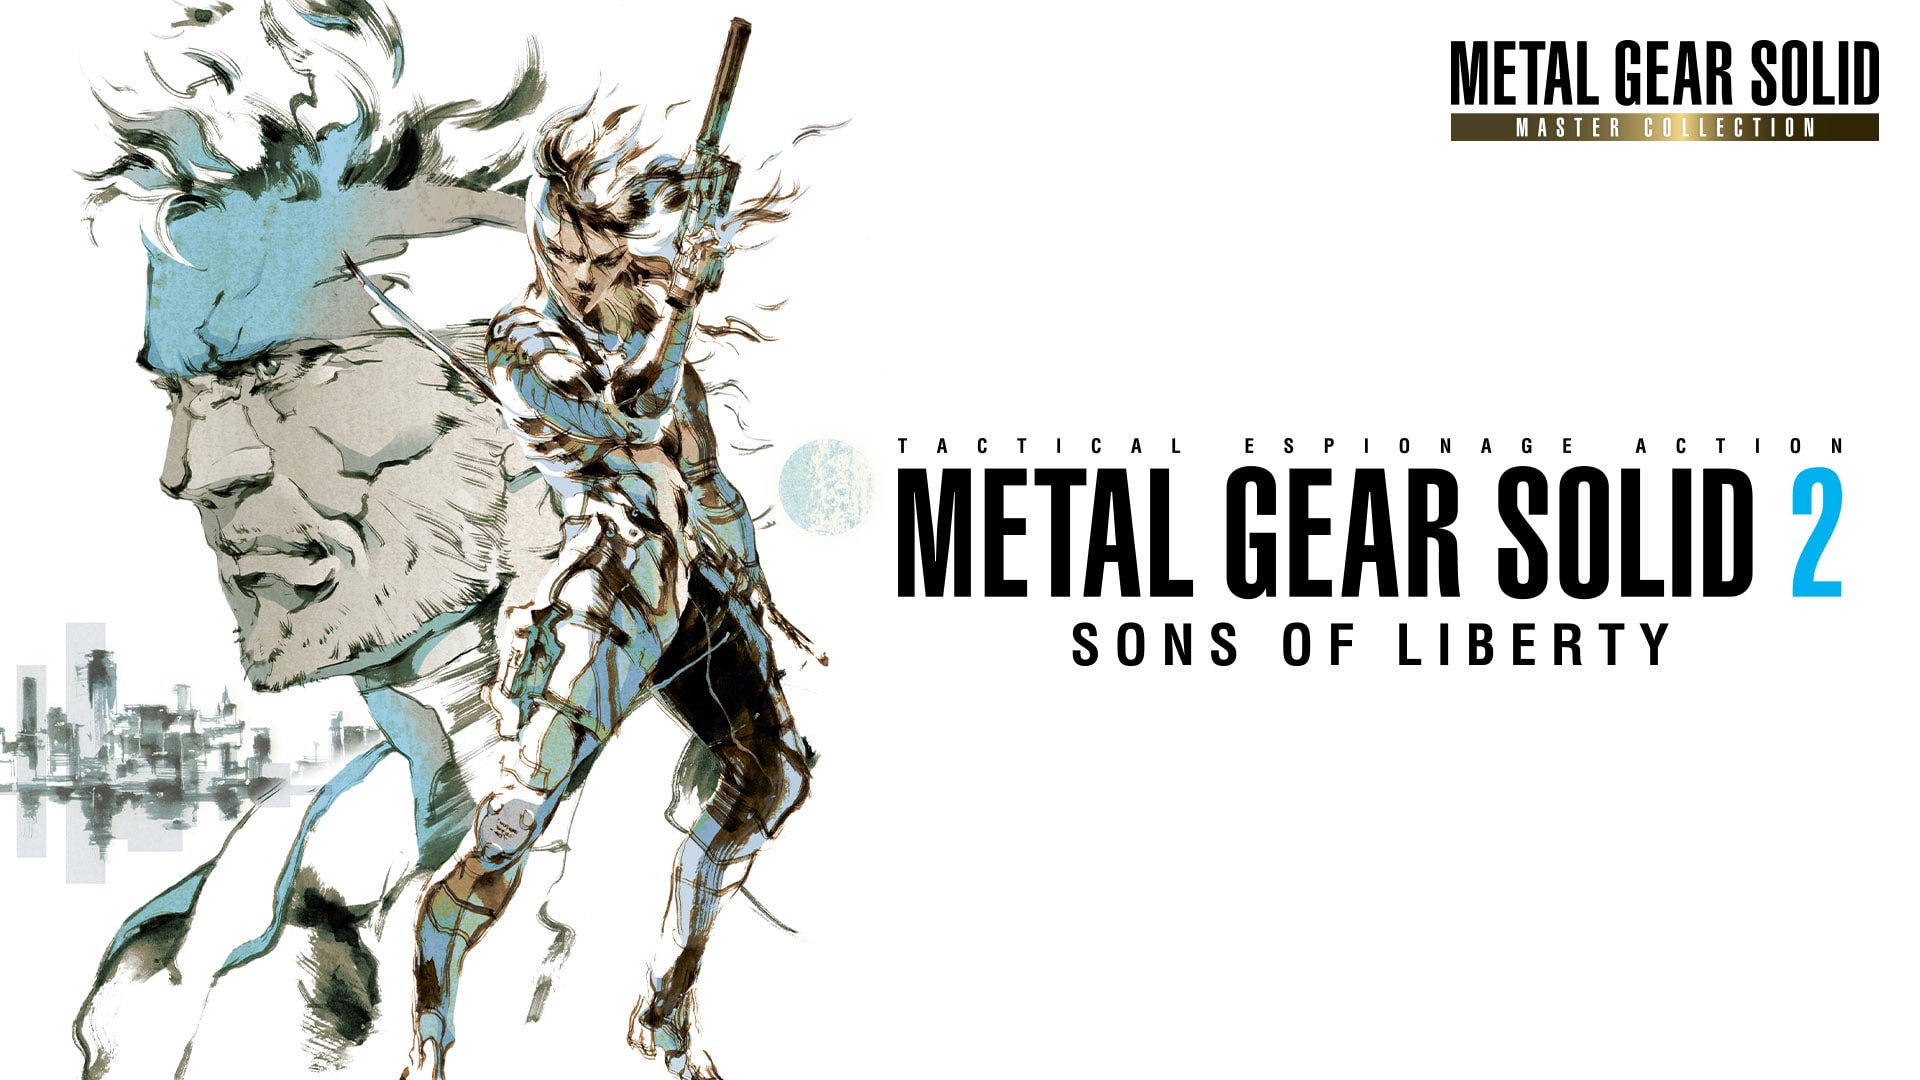 METAL GEAR SOLID: MASTER COLLECTION Vol. 1 is now available on the 